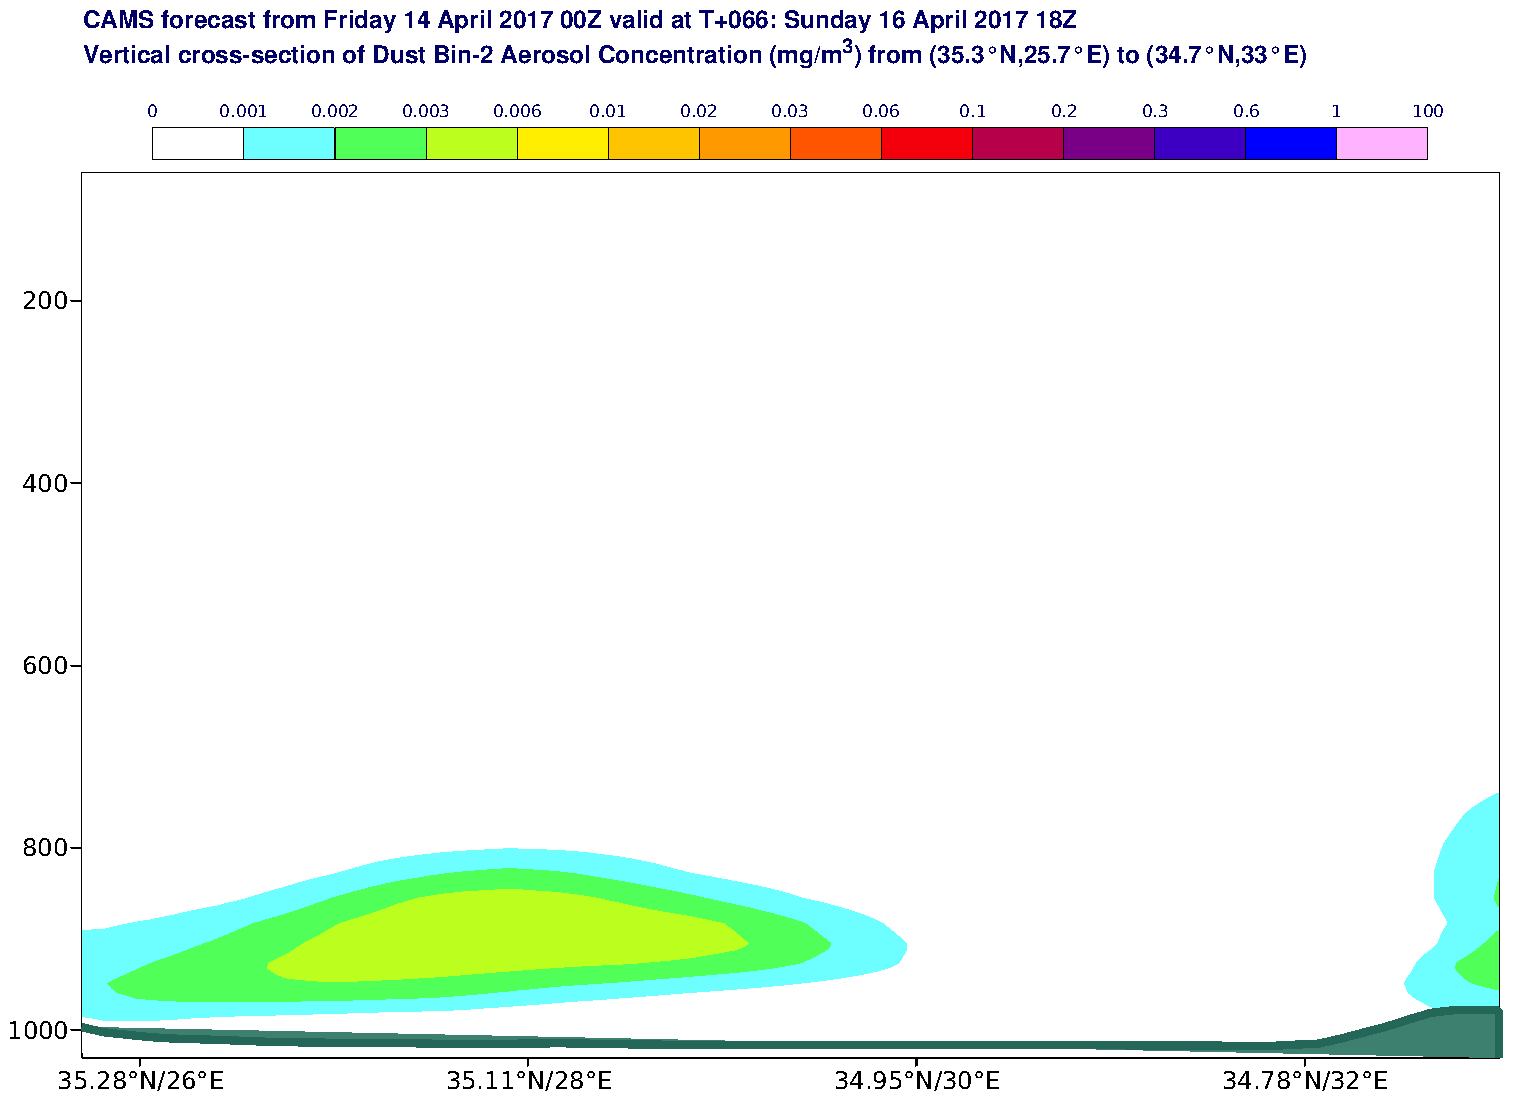 Vertical cross-section of Dust Bin-2 Aerosol Concentration (mg/m3) valid at T66 - 2017-04-16 18:00